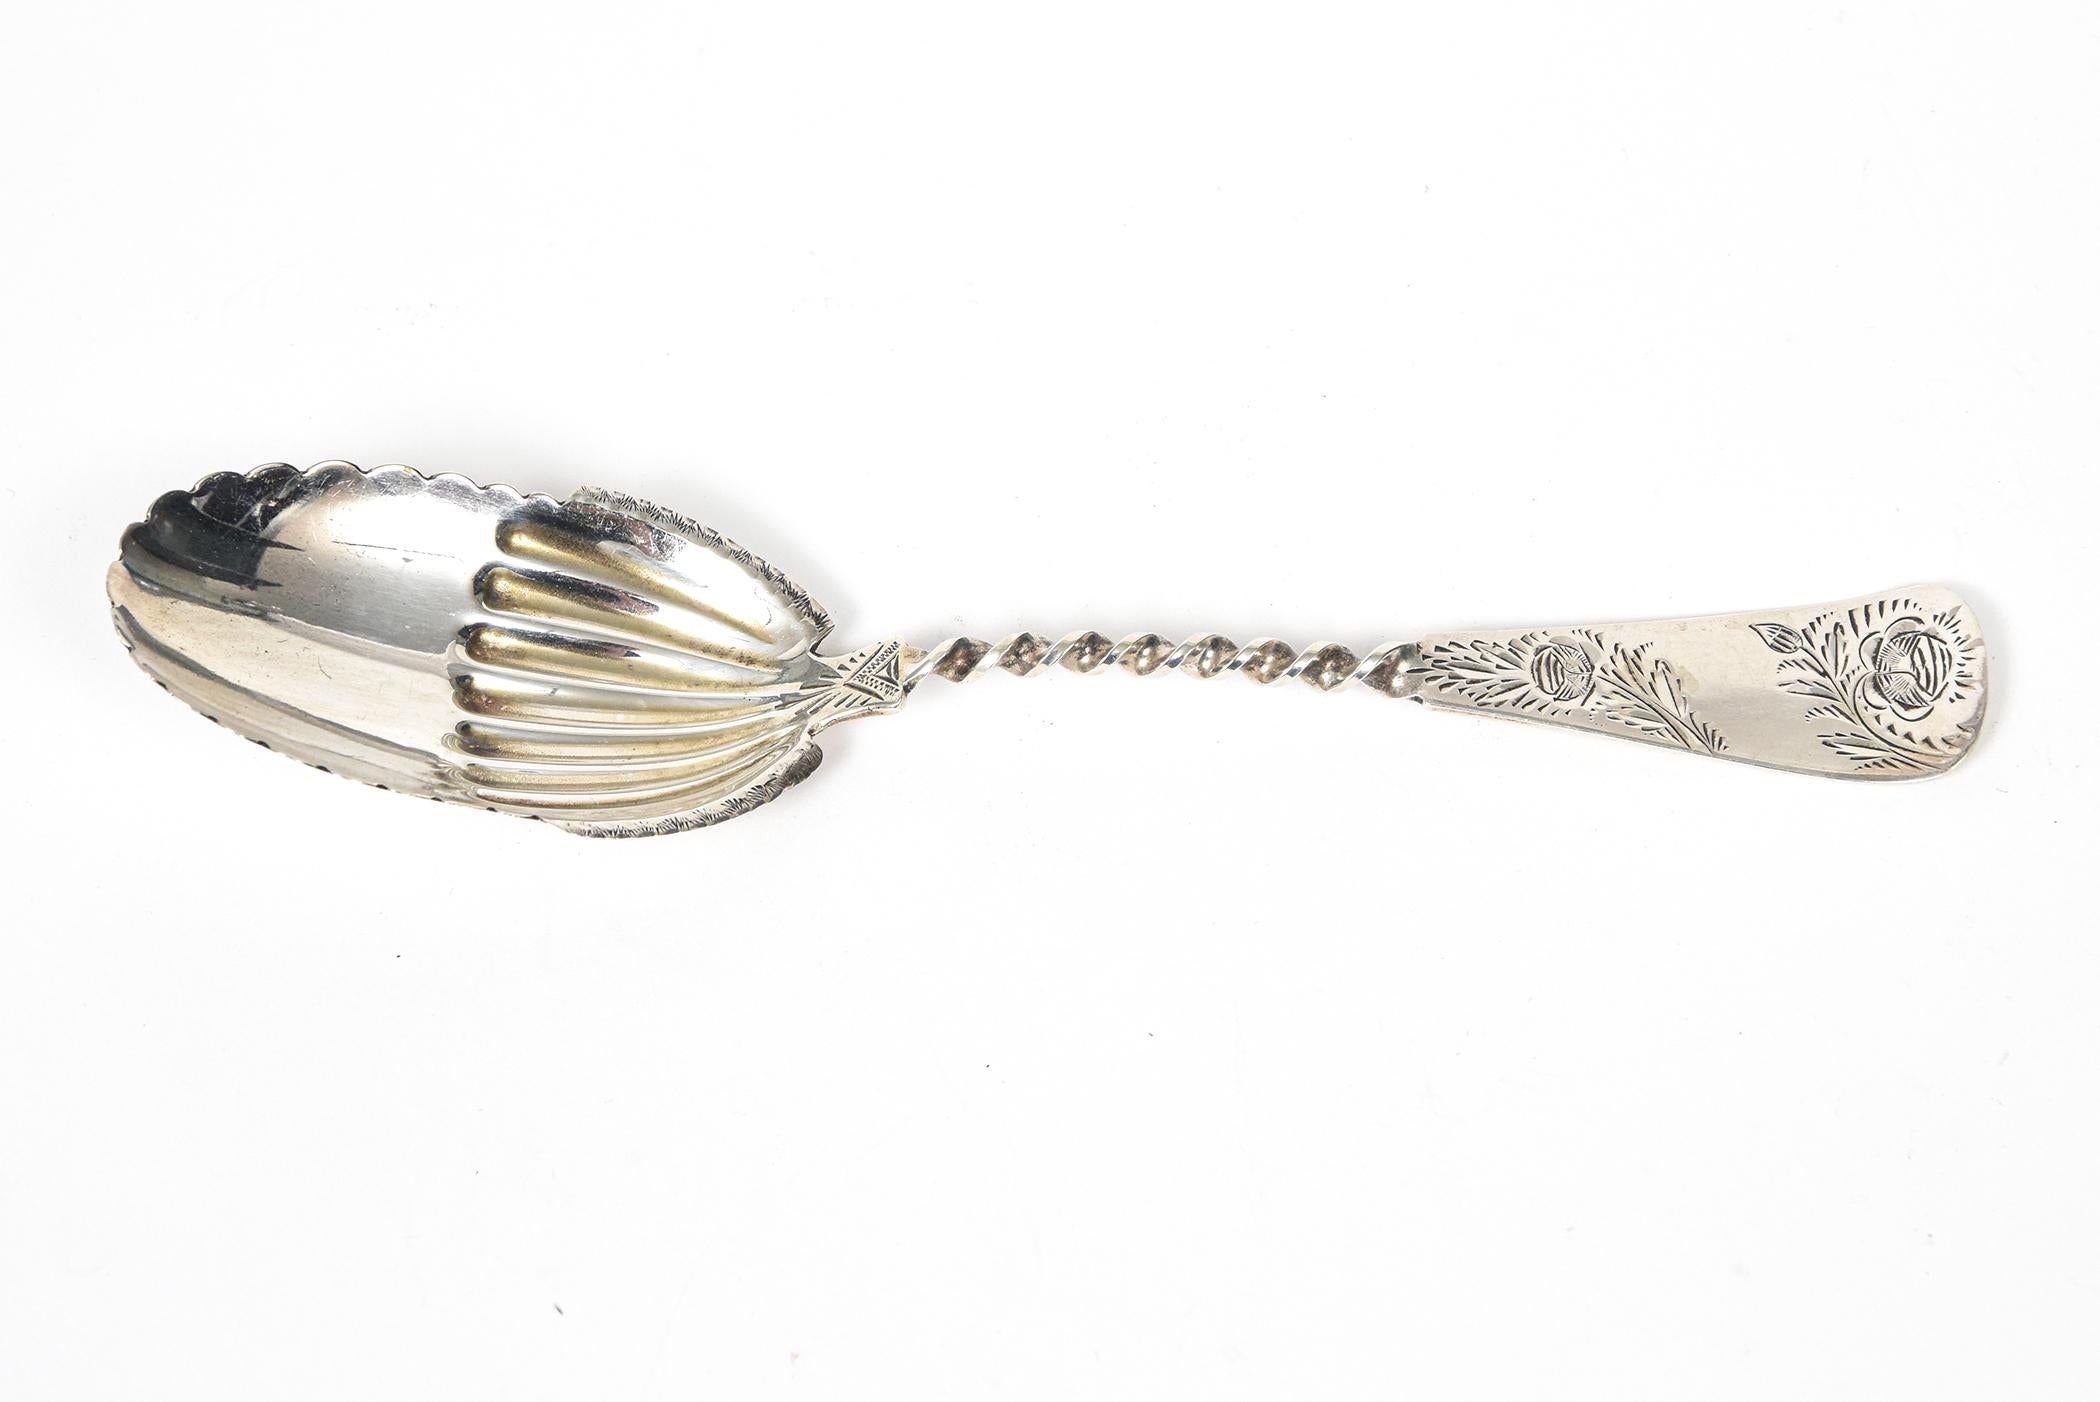 Ornate sterling silver serving spoon featuring an engraved floral handle that is twisted where it meats the bowl.. The spoon area is an oval with ridges inside and a scalloped edge. Marked sterling on the back.